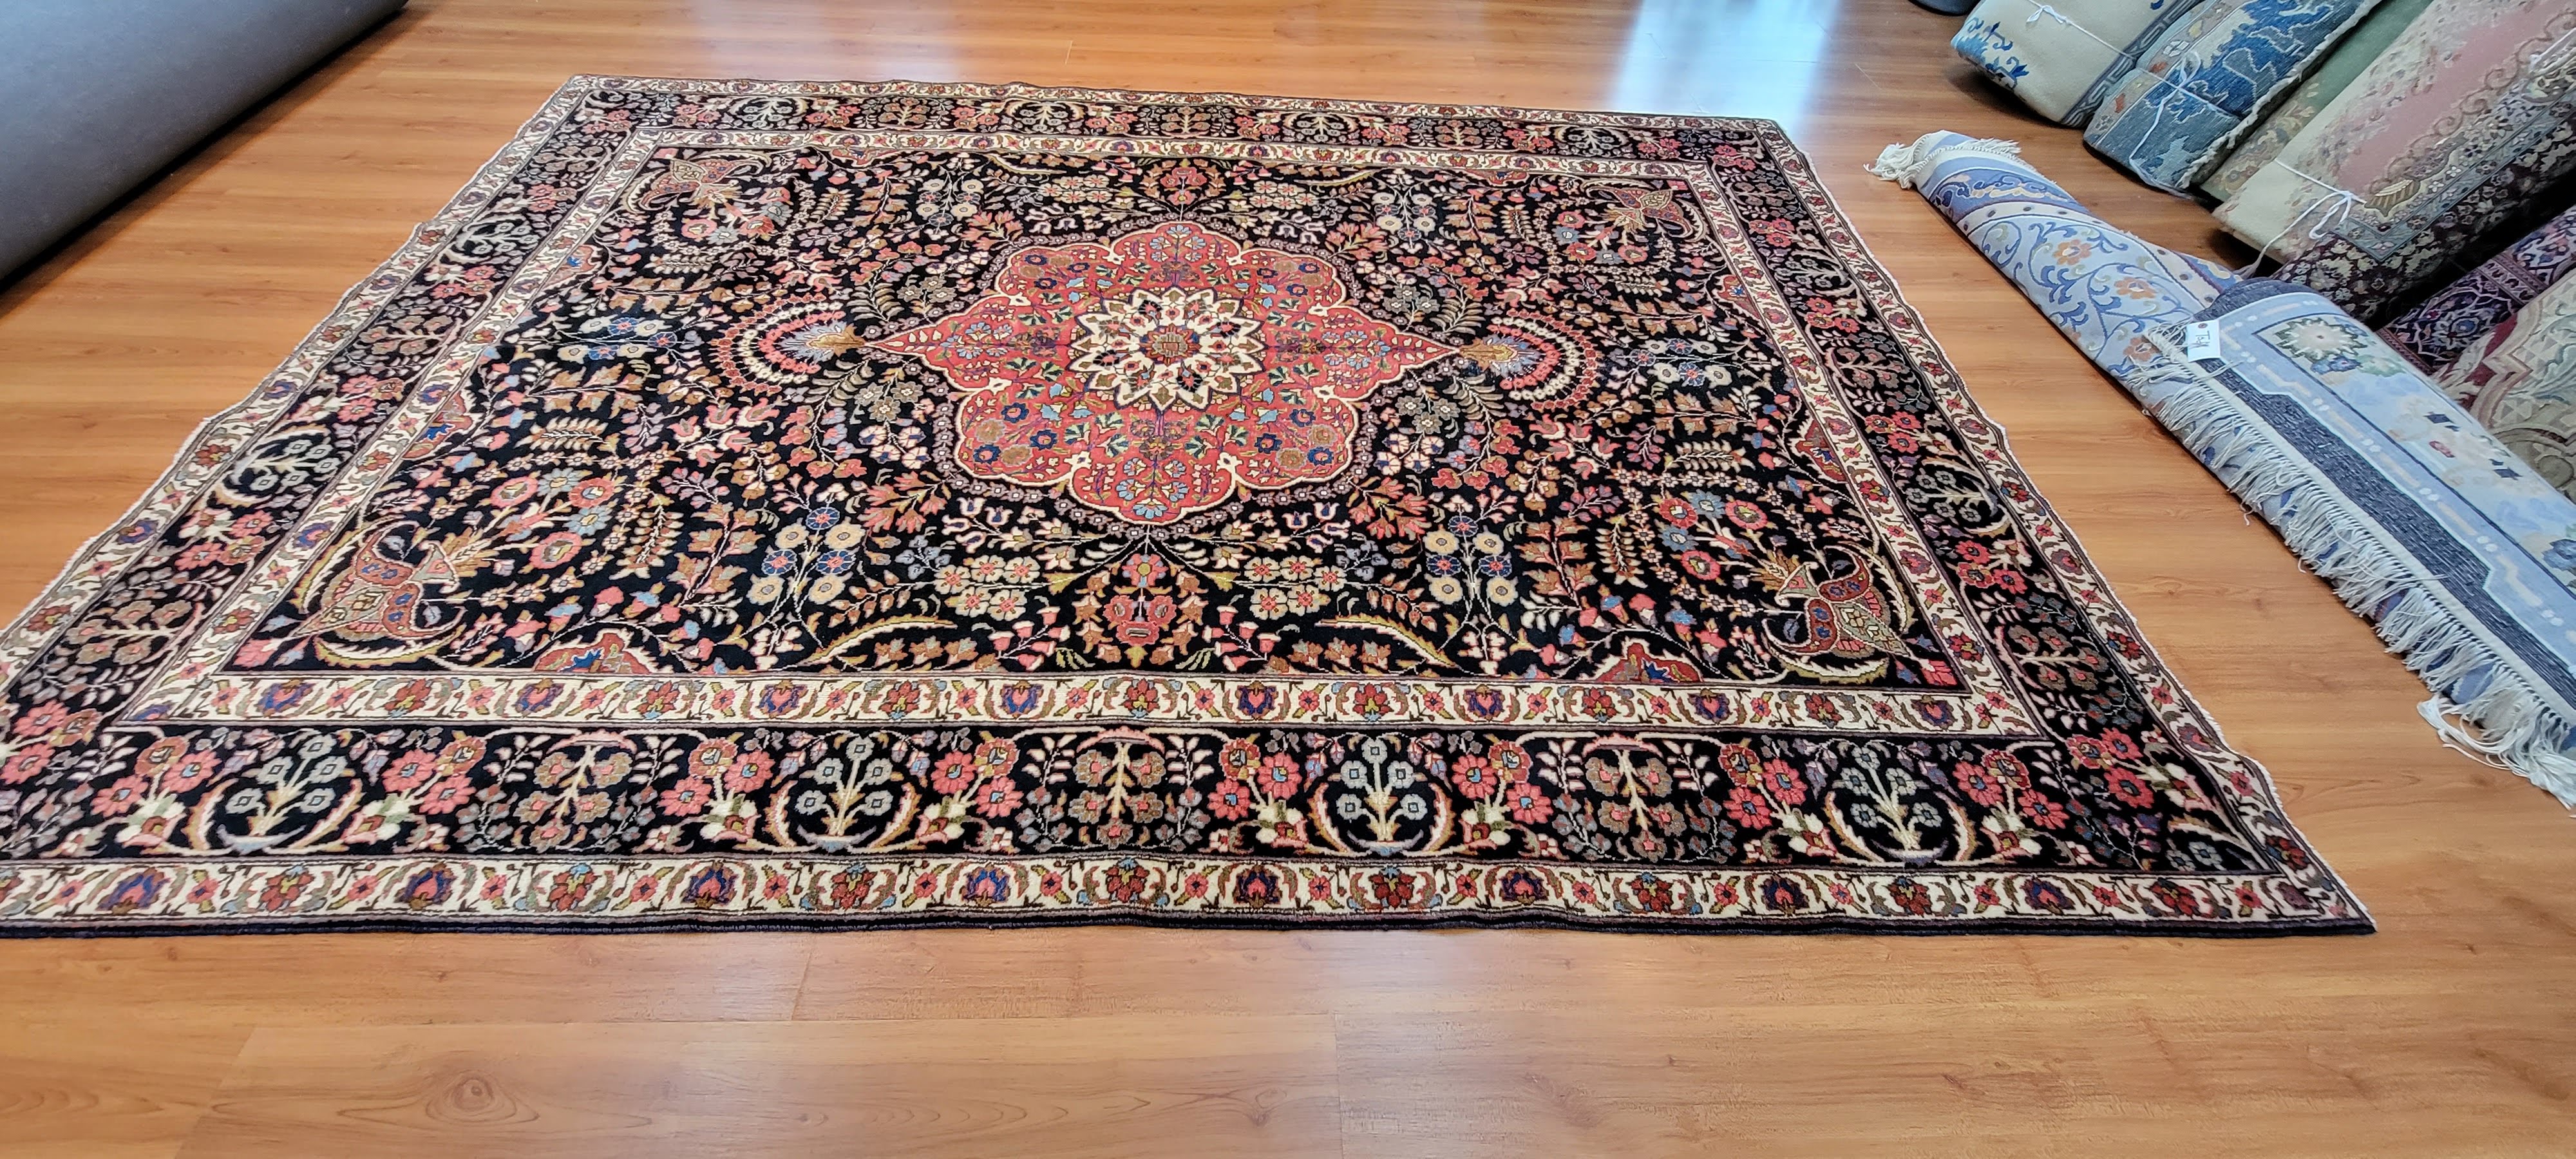 antique rugs cleaning